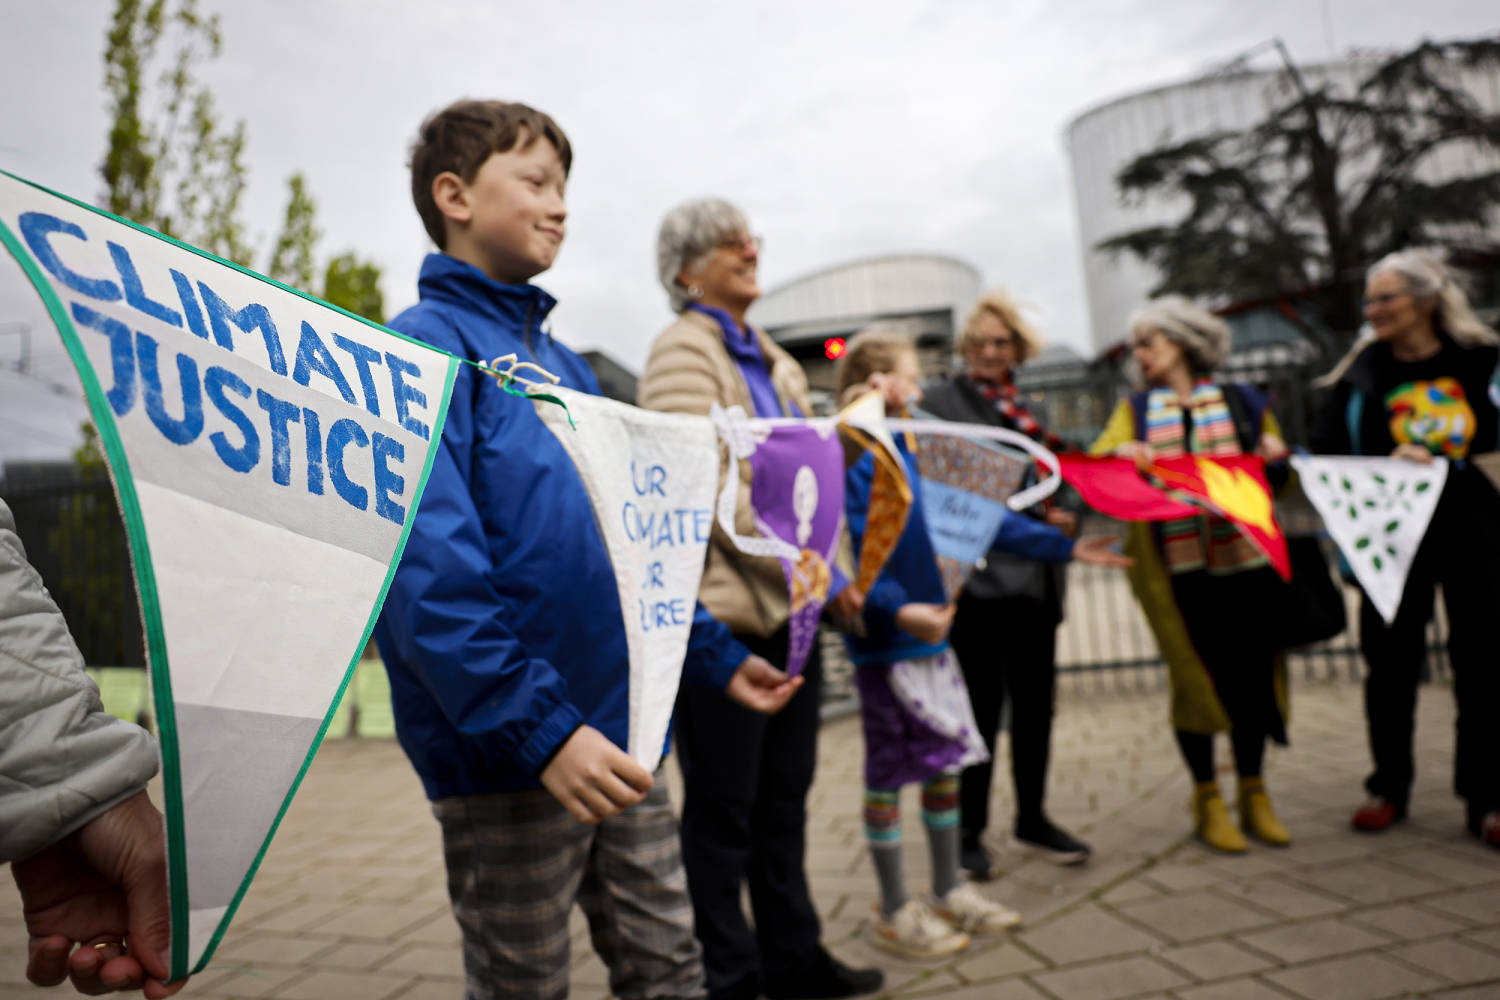 Swiss women score a landmark climate win in a court decision that could ripple across Europe